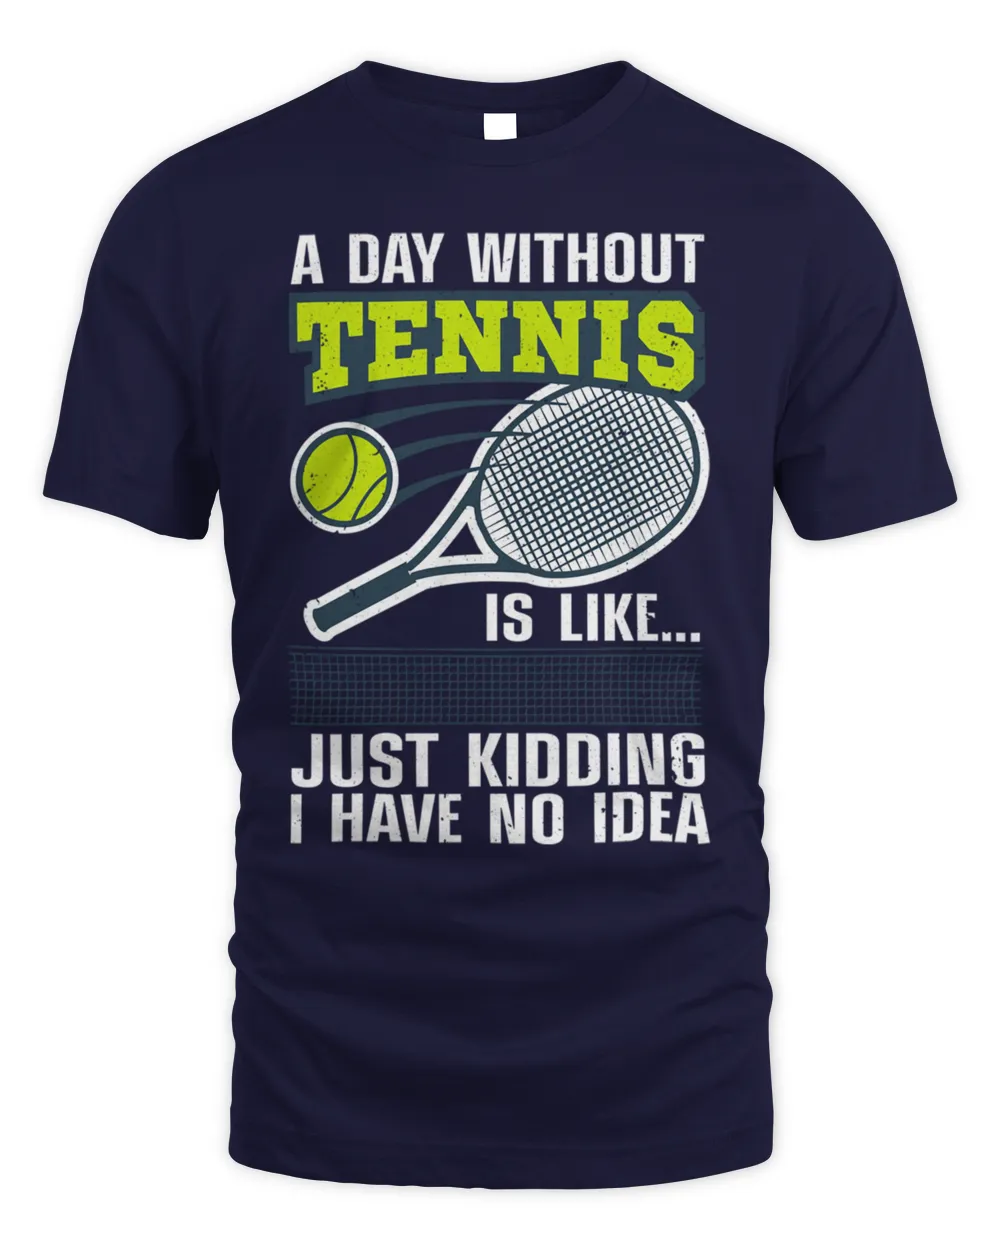 A day without tennis